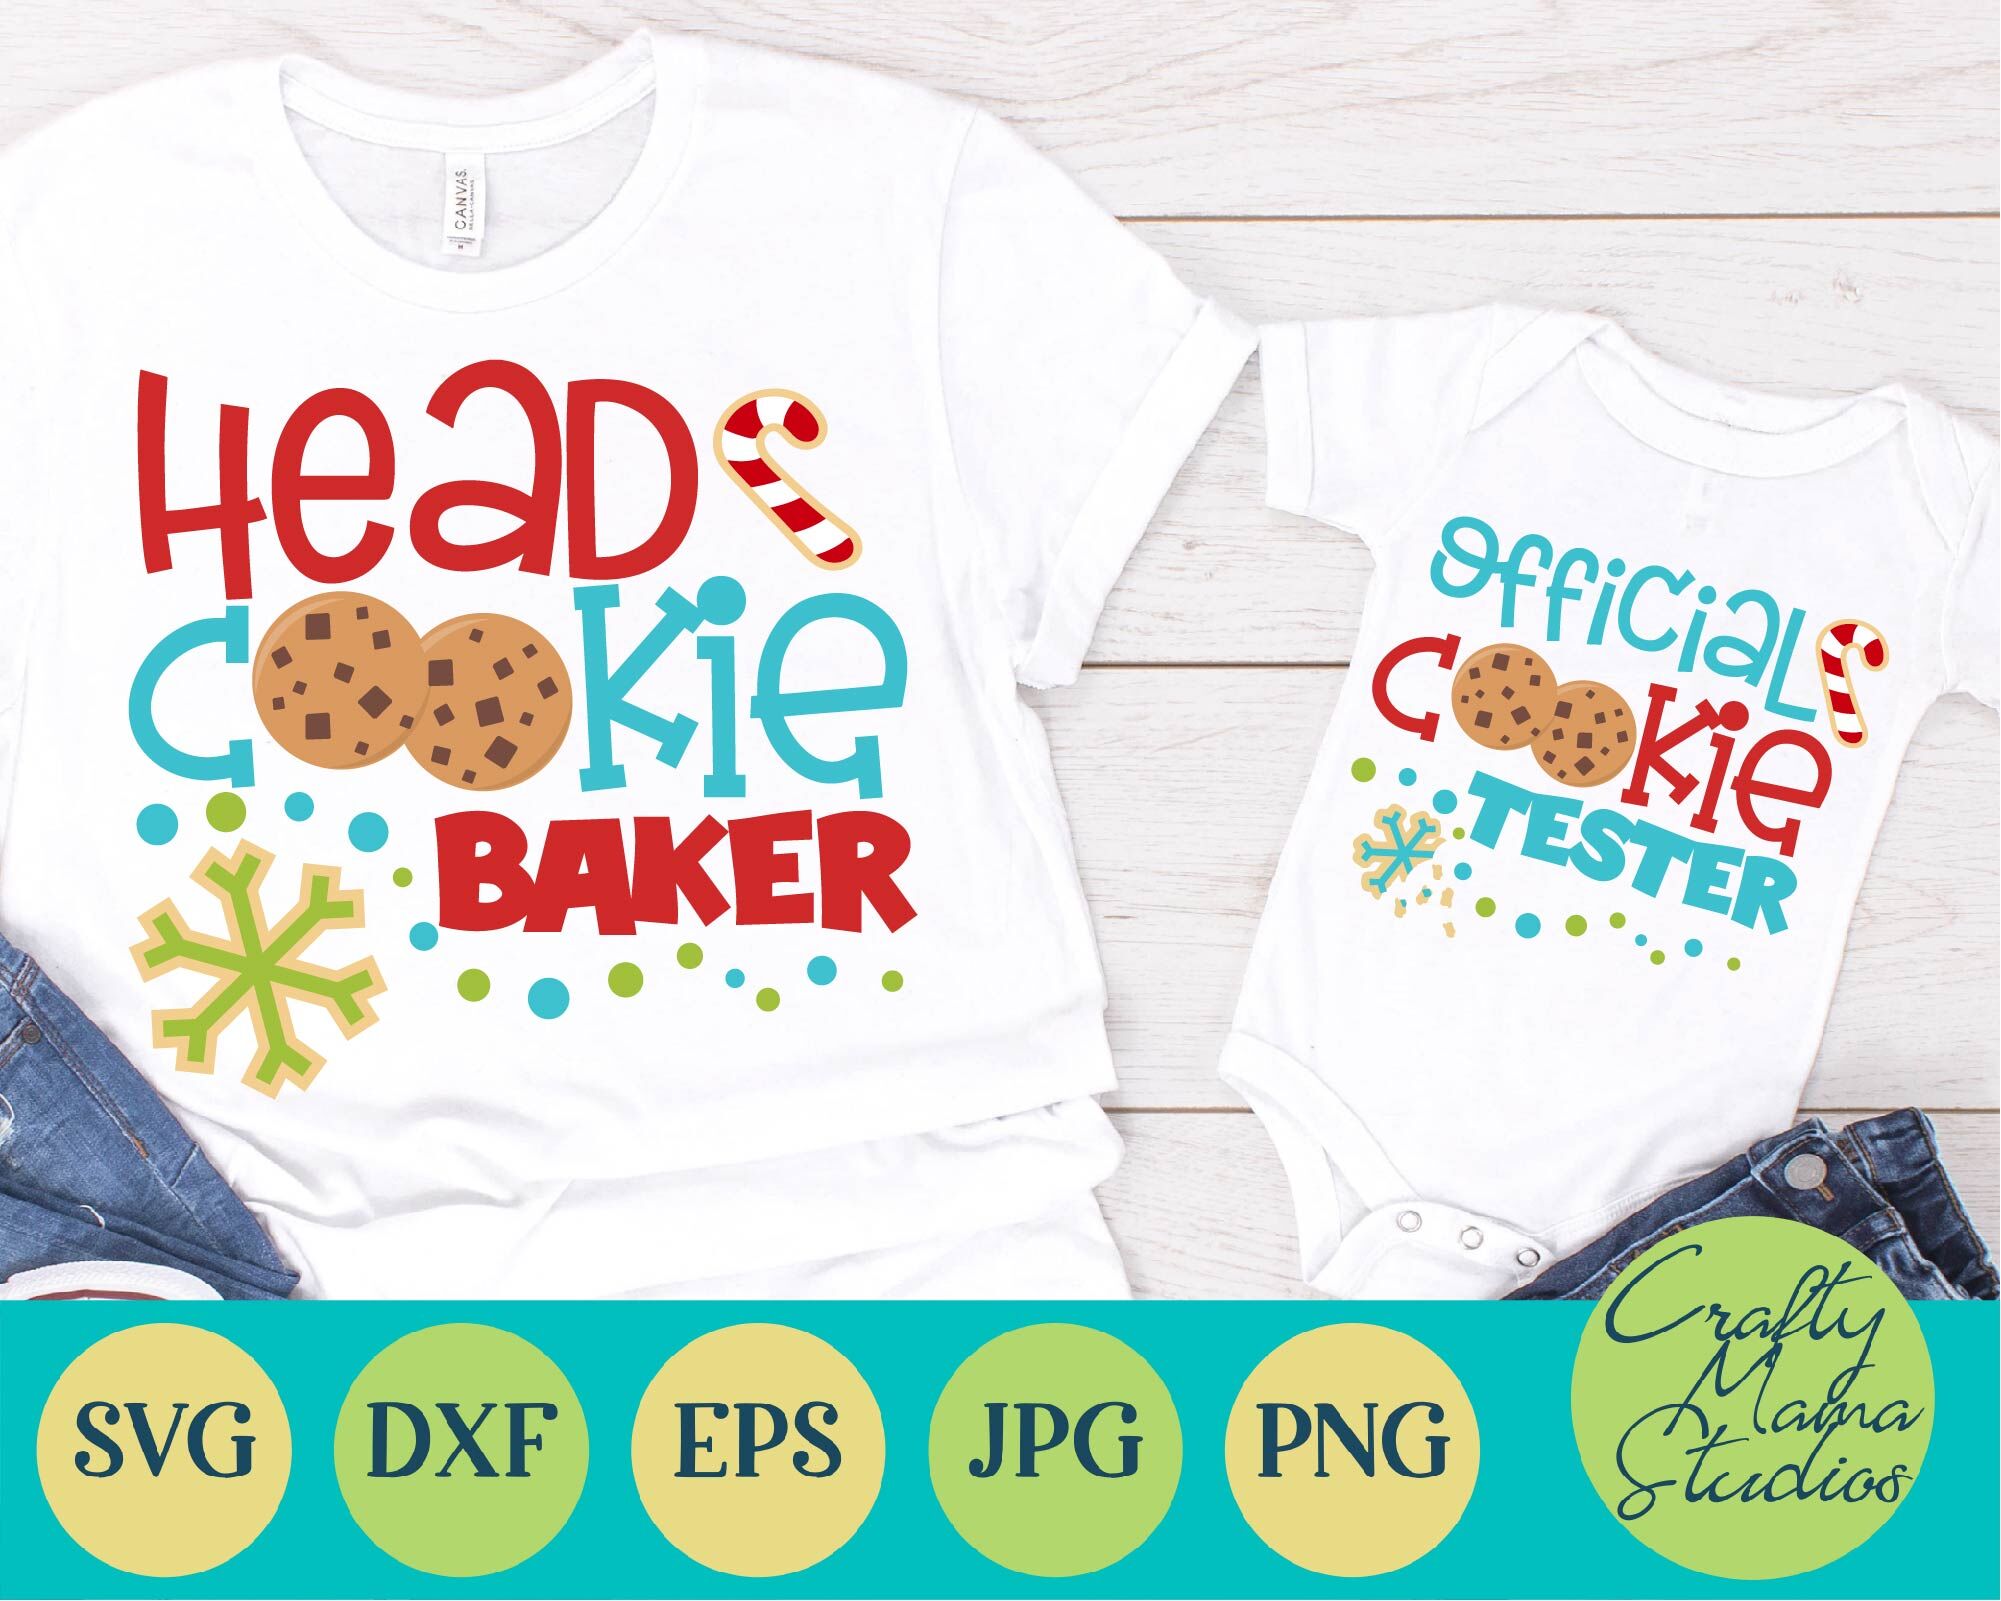 Christmas Svg Head Cookie Baker Official Cookie Tester By Crafty Mama Studios Thehungryjpeg Com